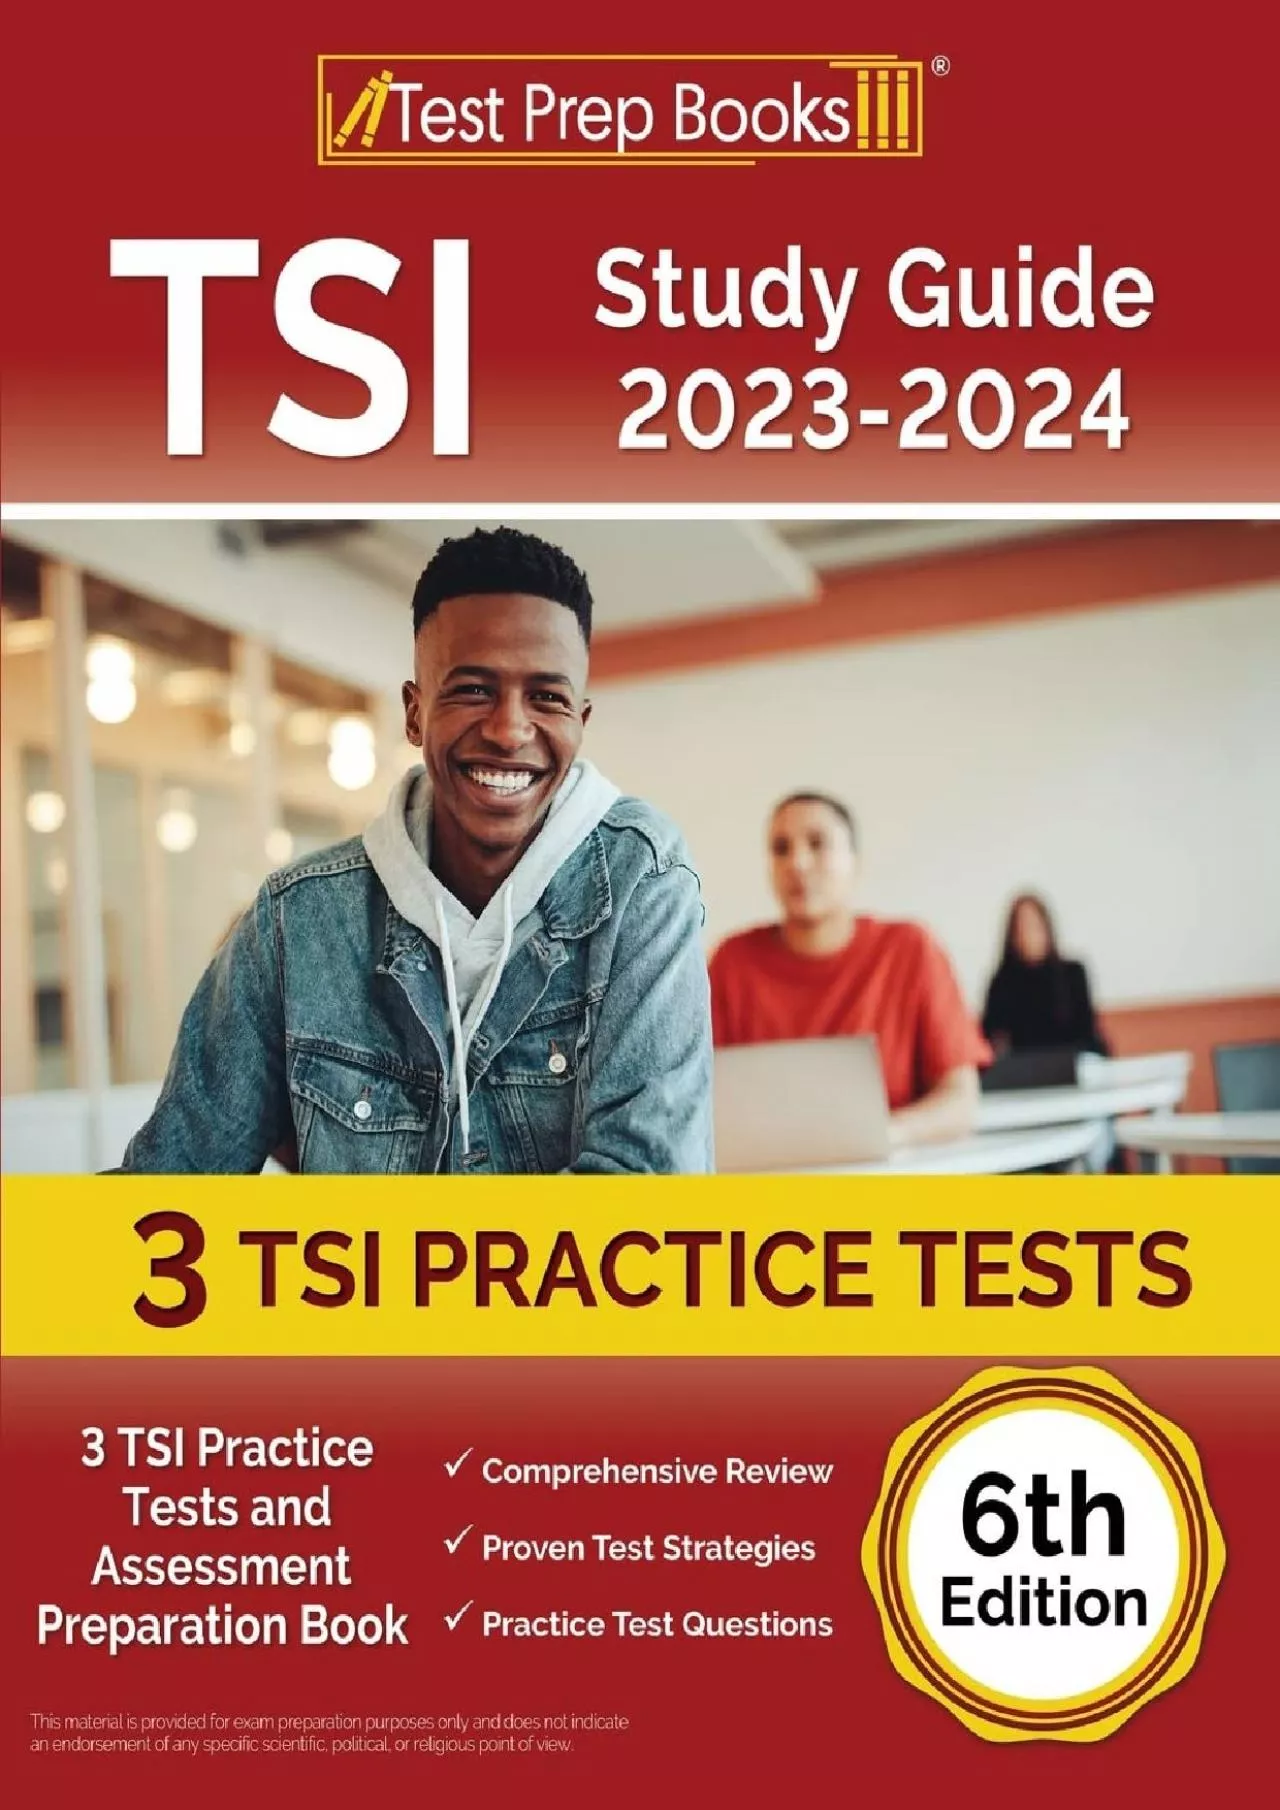 [EBOOK] TSI Study Guide 2023-2024: 3 TSI Practice Tests and Assessment Preparation Book